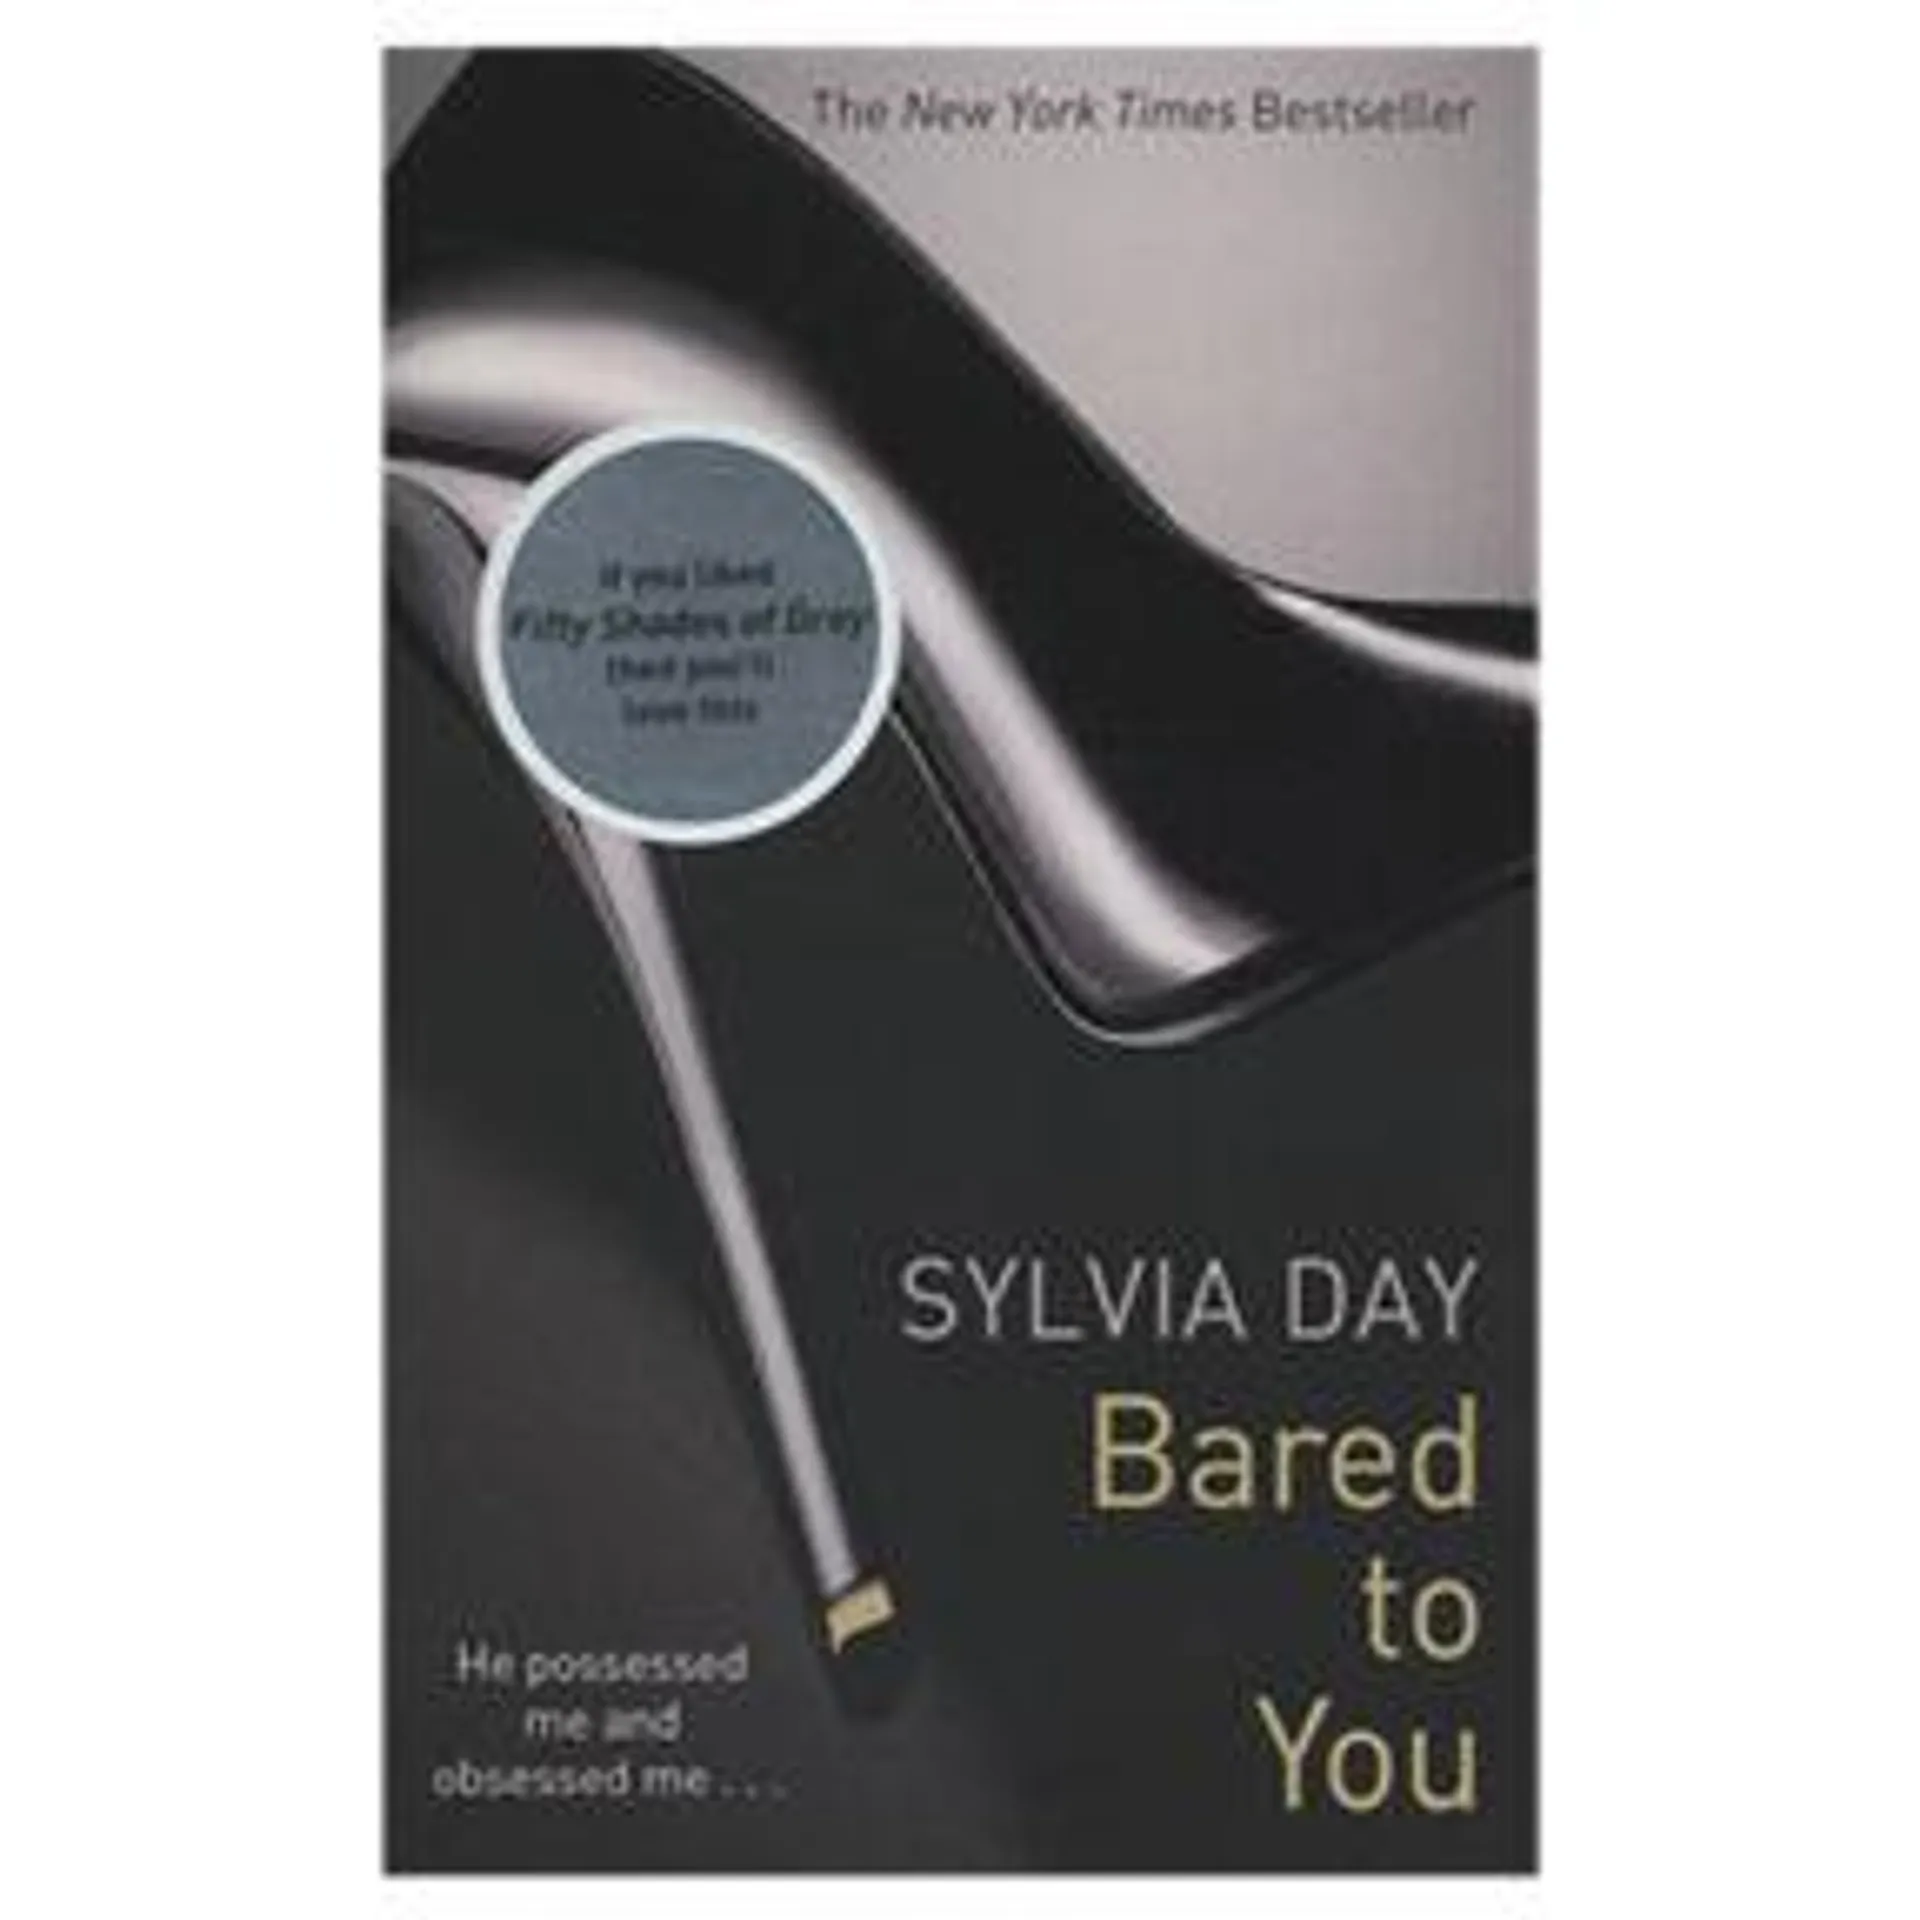 Paperback Bared to You by Sylvia Day